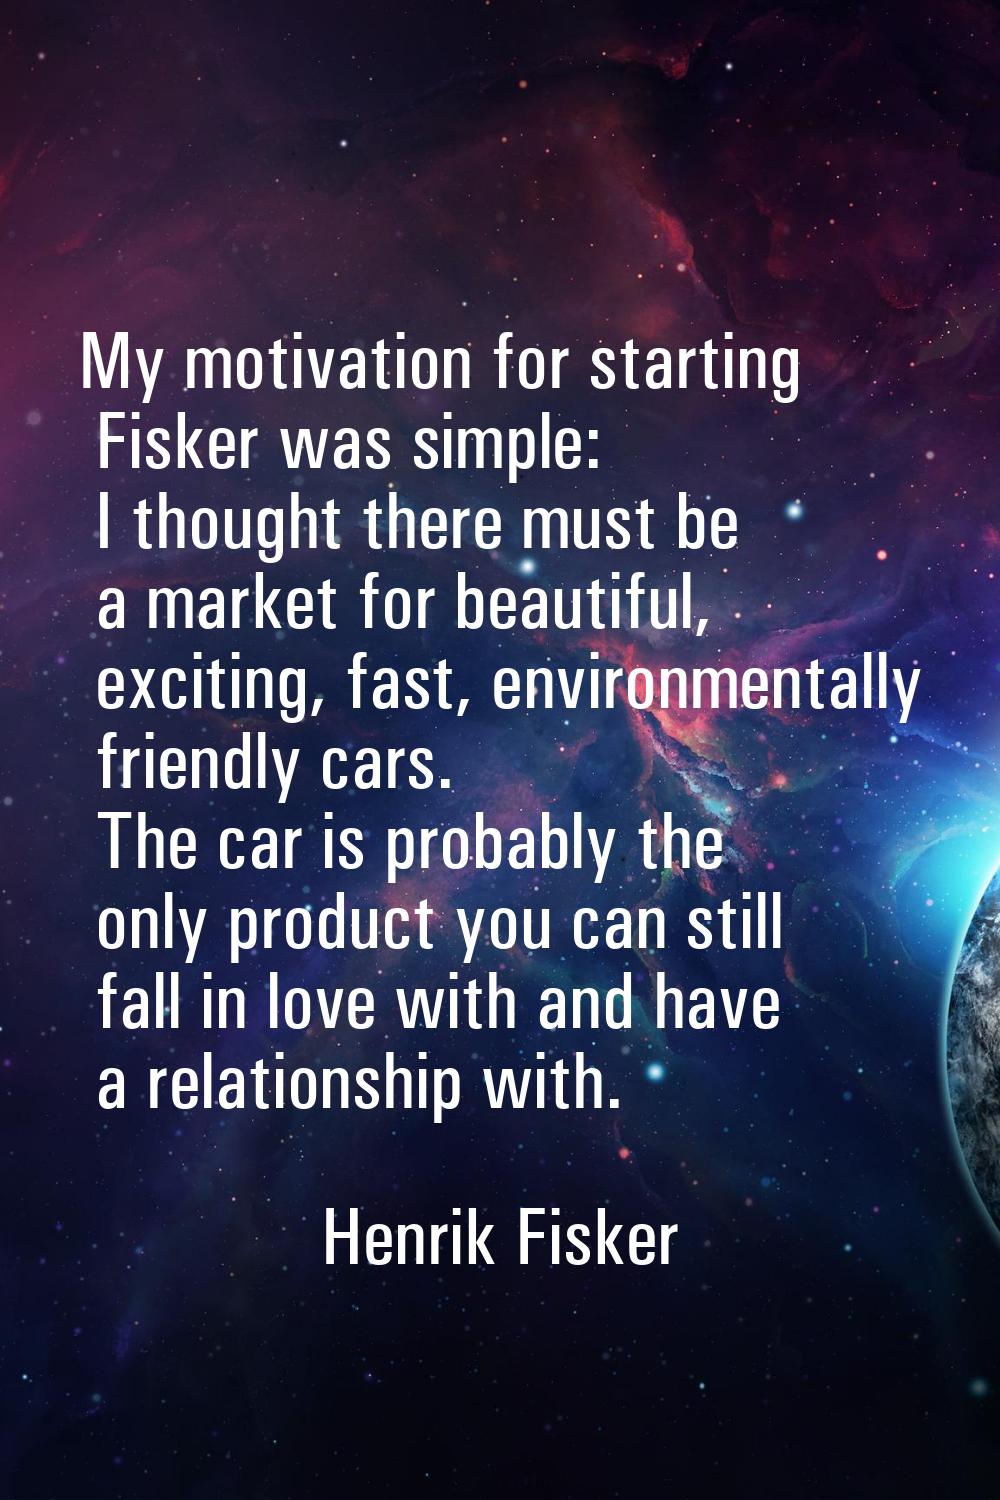 My motivation for starting Fisker was simple: I thought there must be a market for beautiful, excit